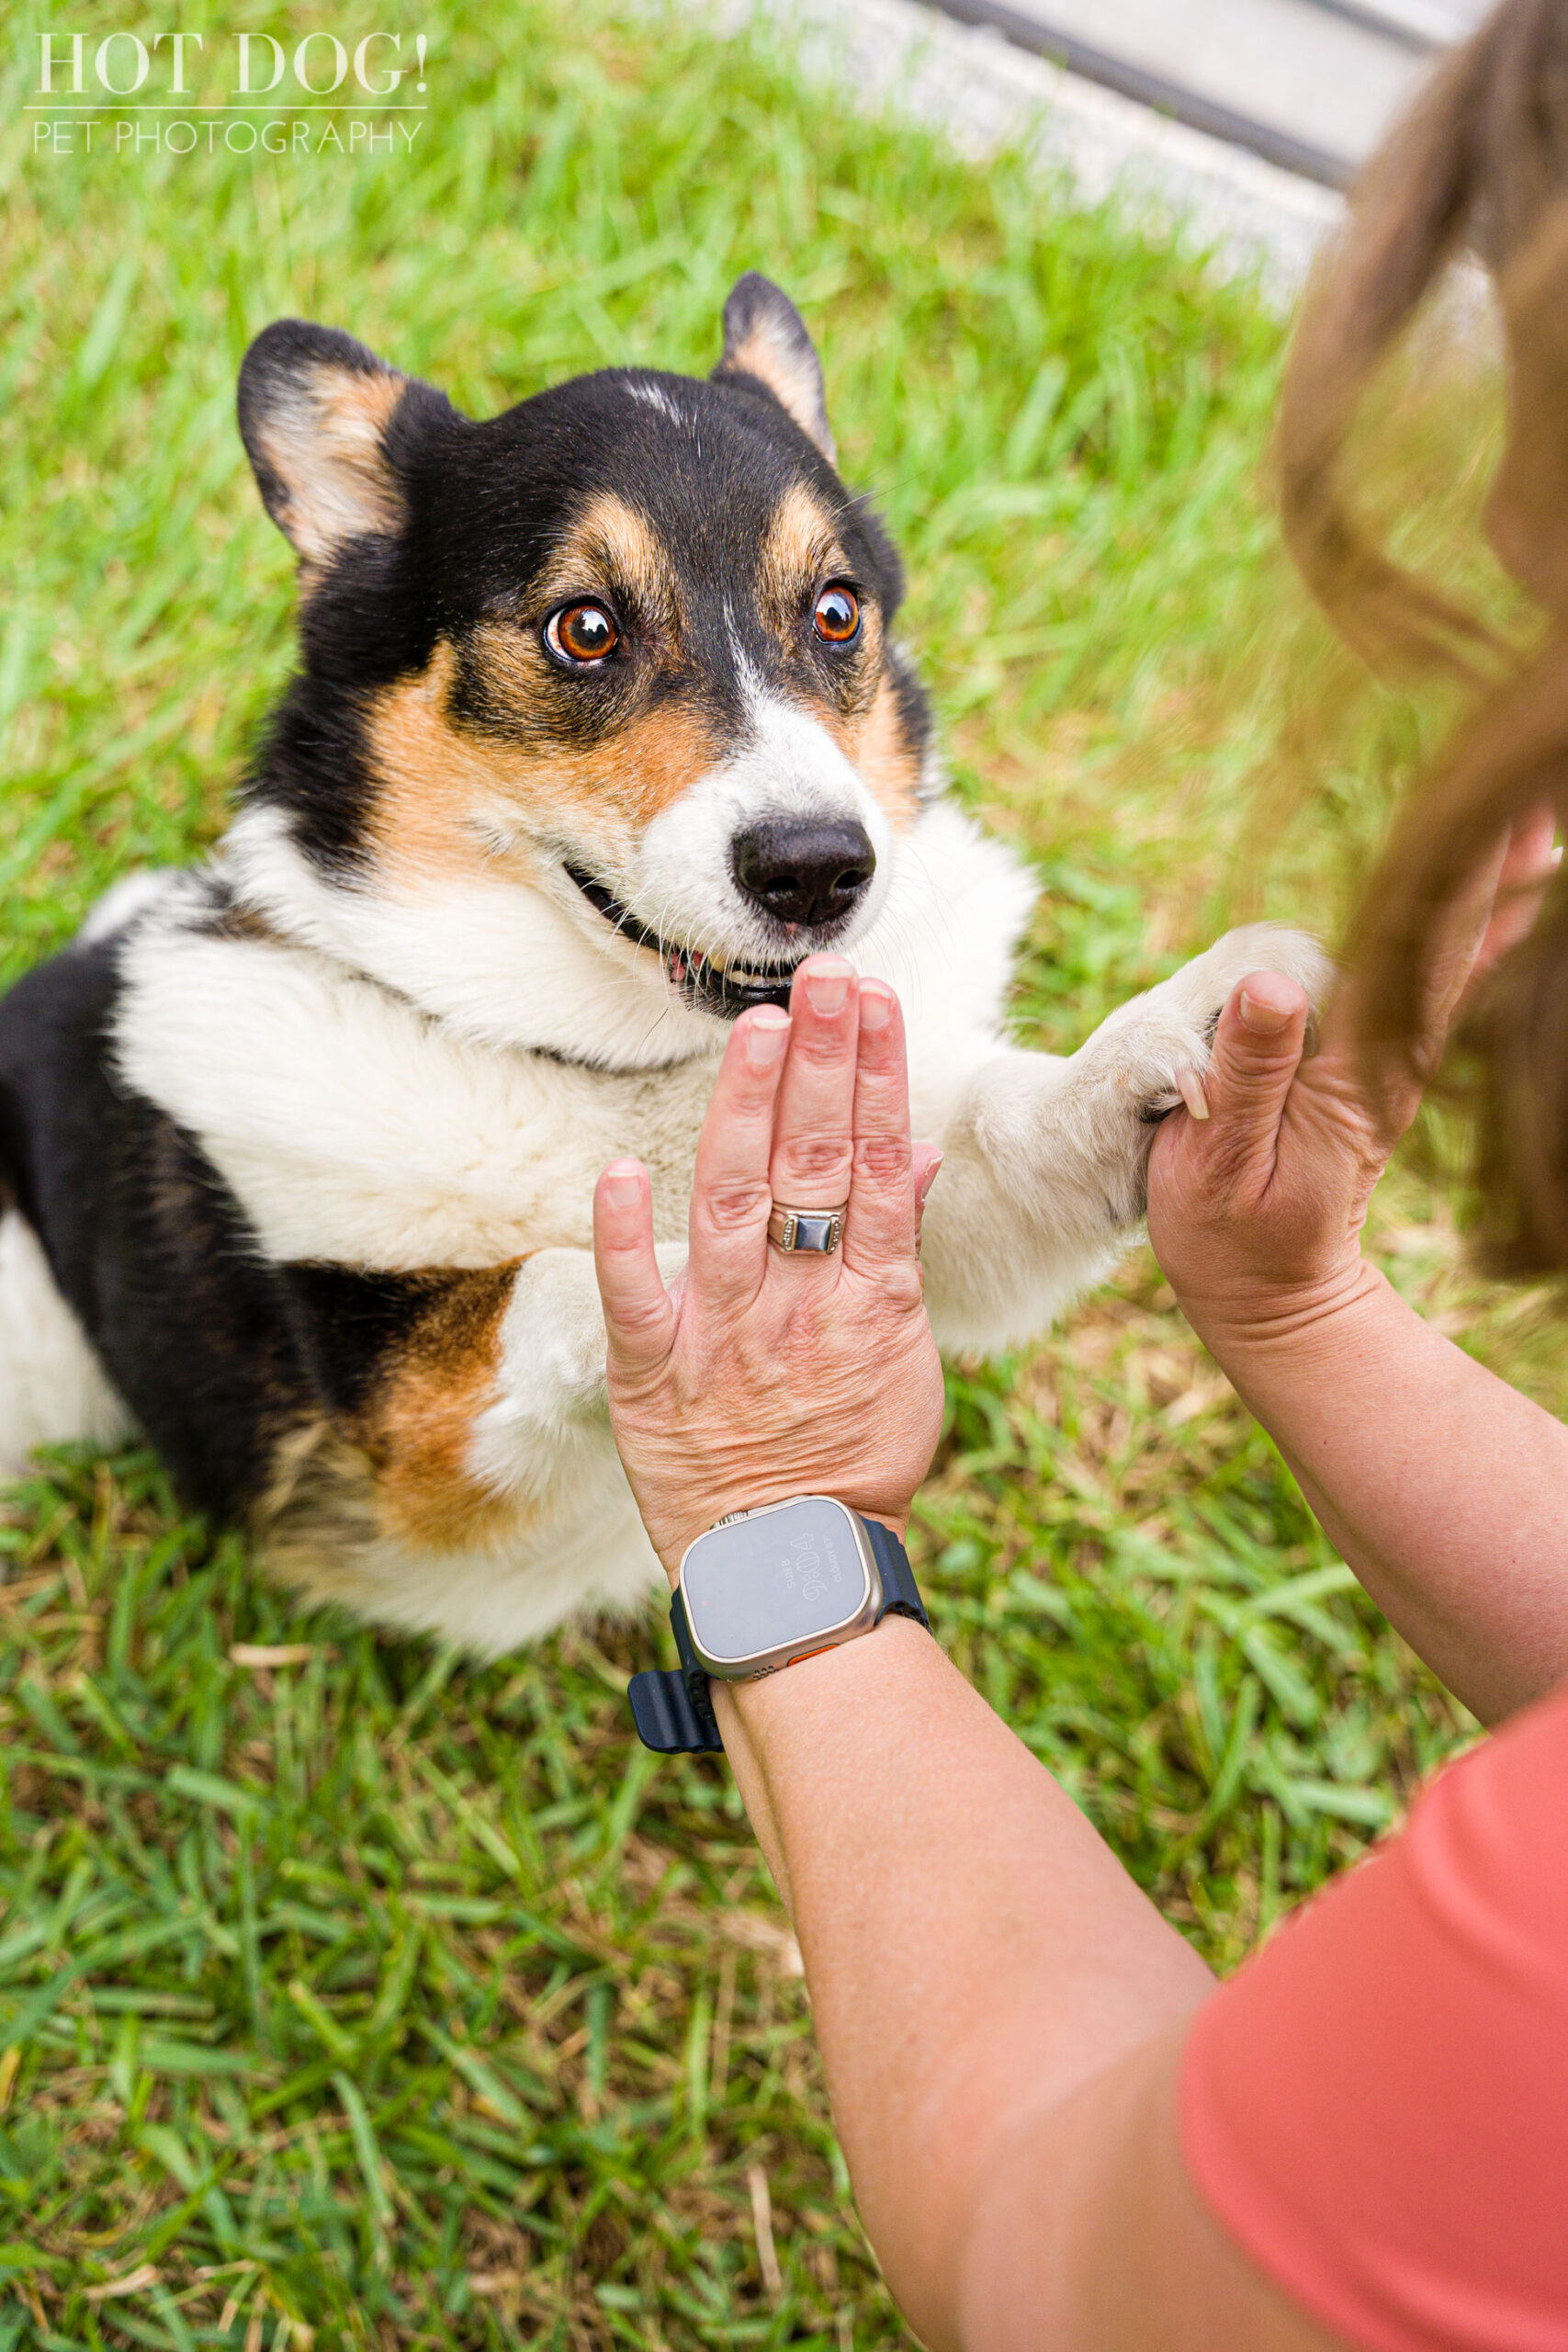 Hot Dog! Pet Photography captures the love and bond between Snap the corgi and his mom in this professional pet photo session.